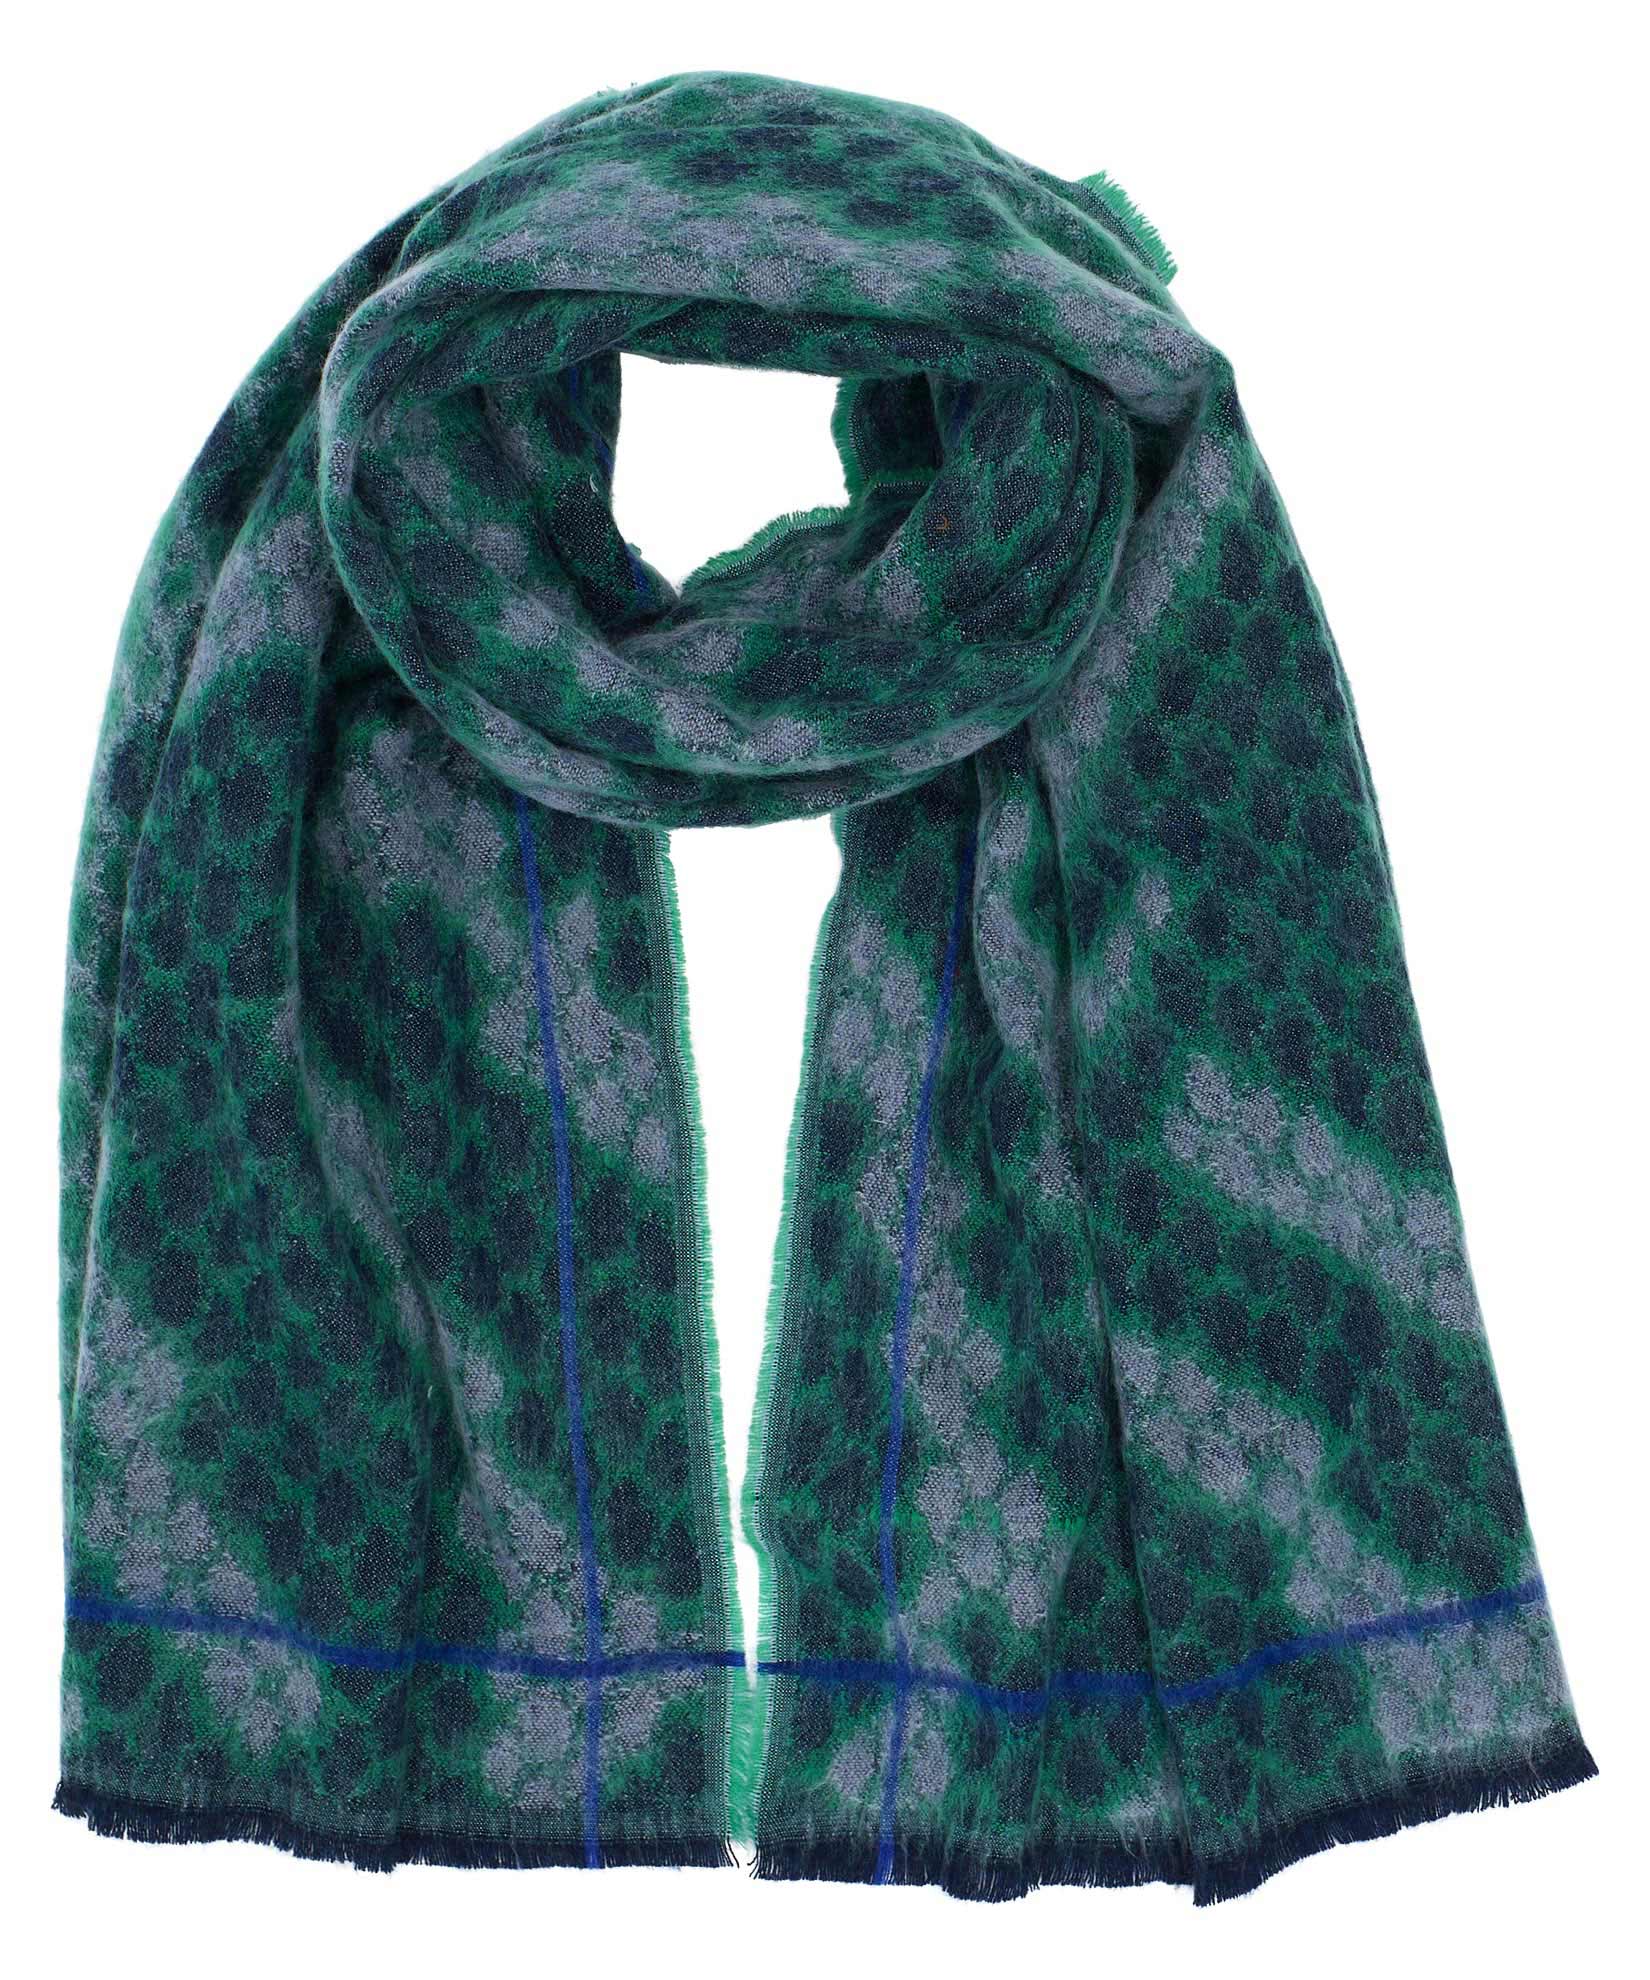 Python Jacquard Scarf in color Echo Navy